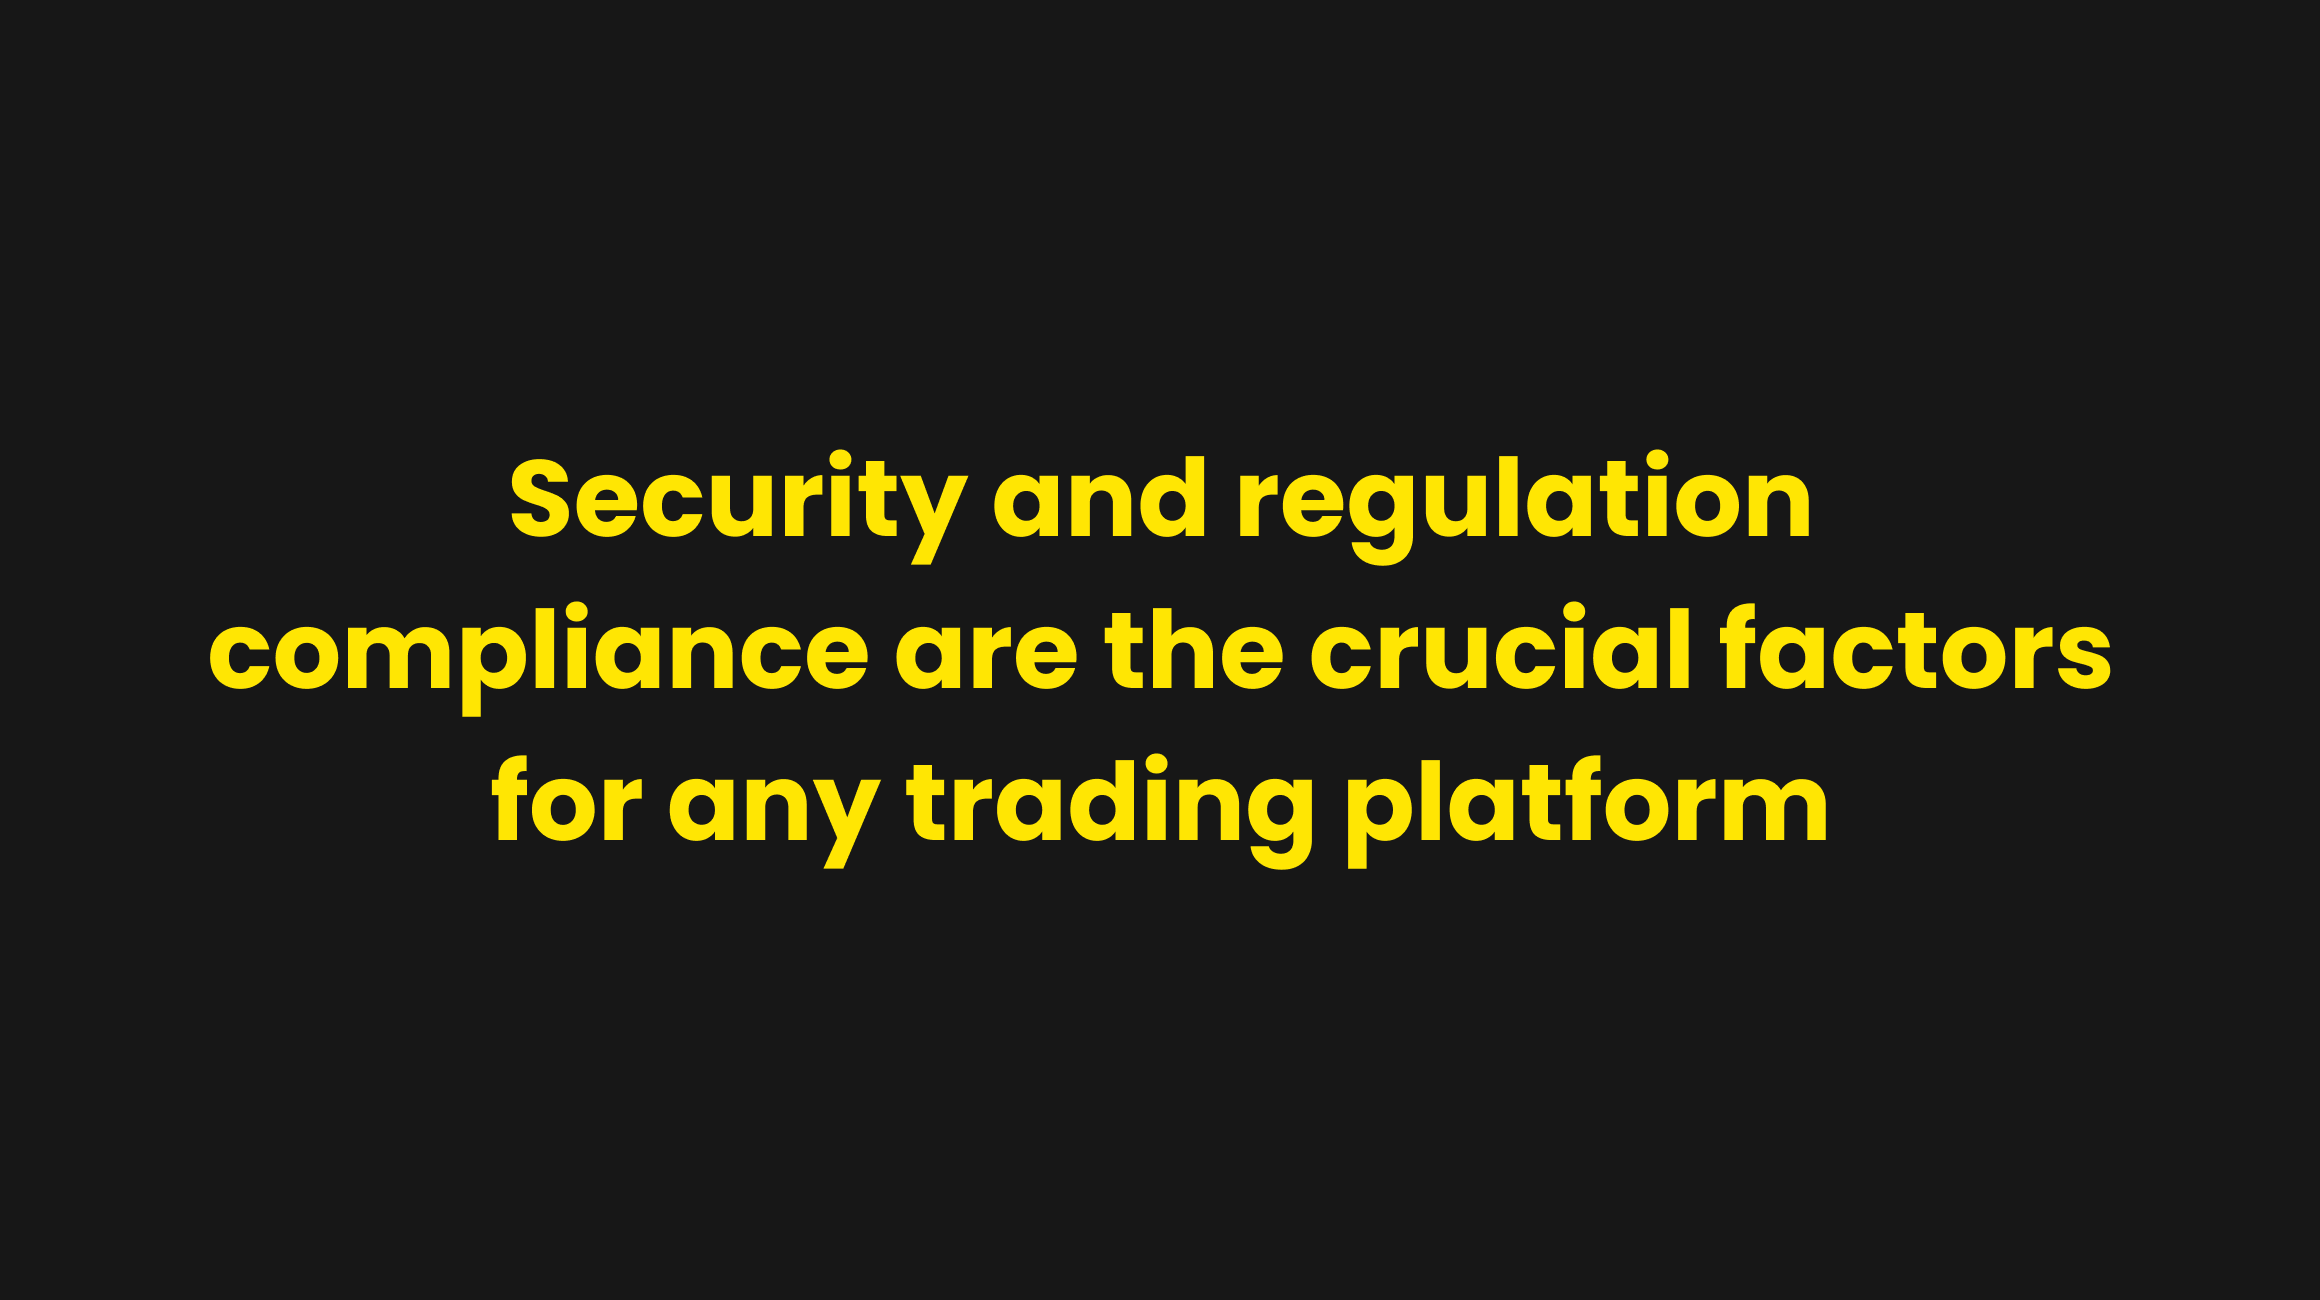 Security and regulation compliance are the crucial factors for any trading platform